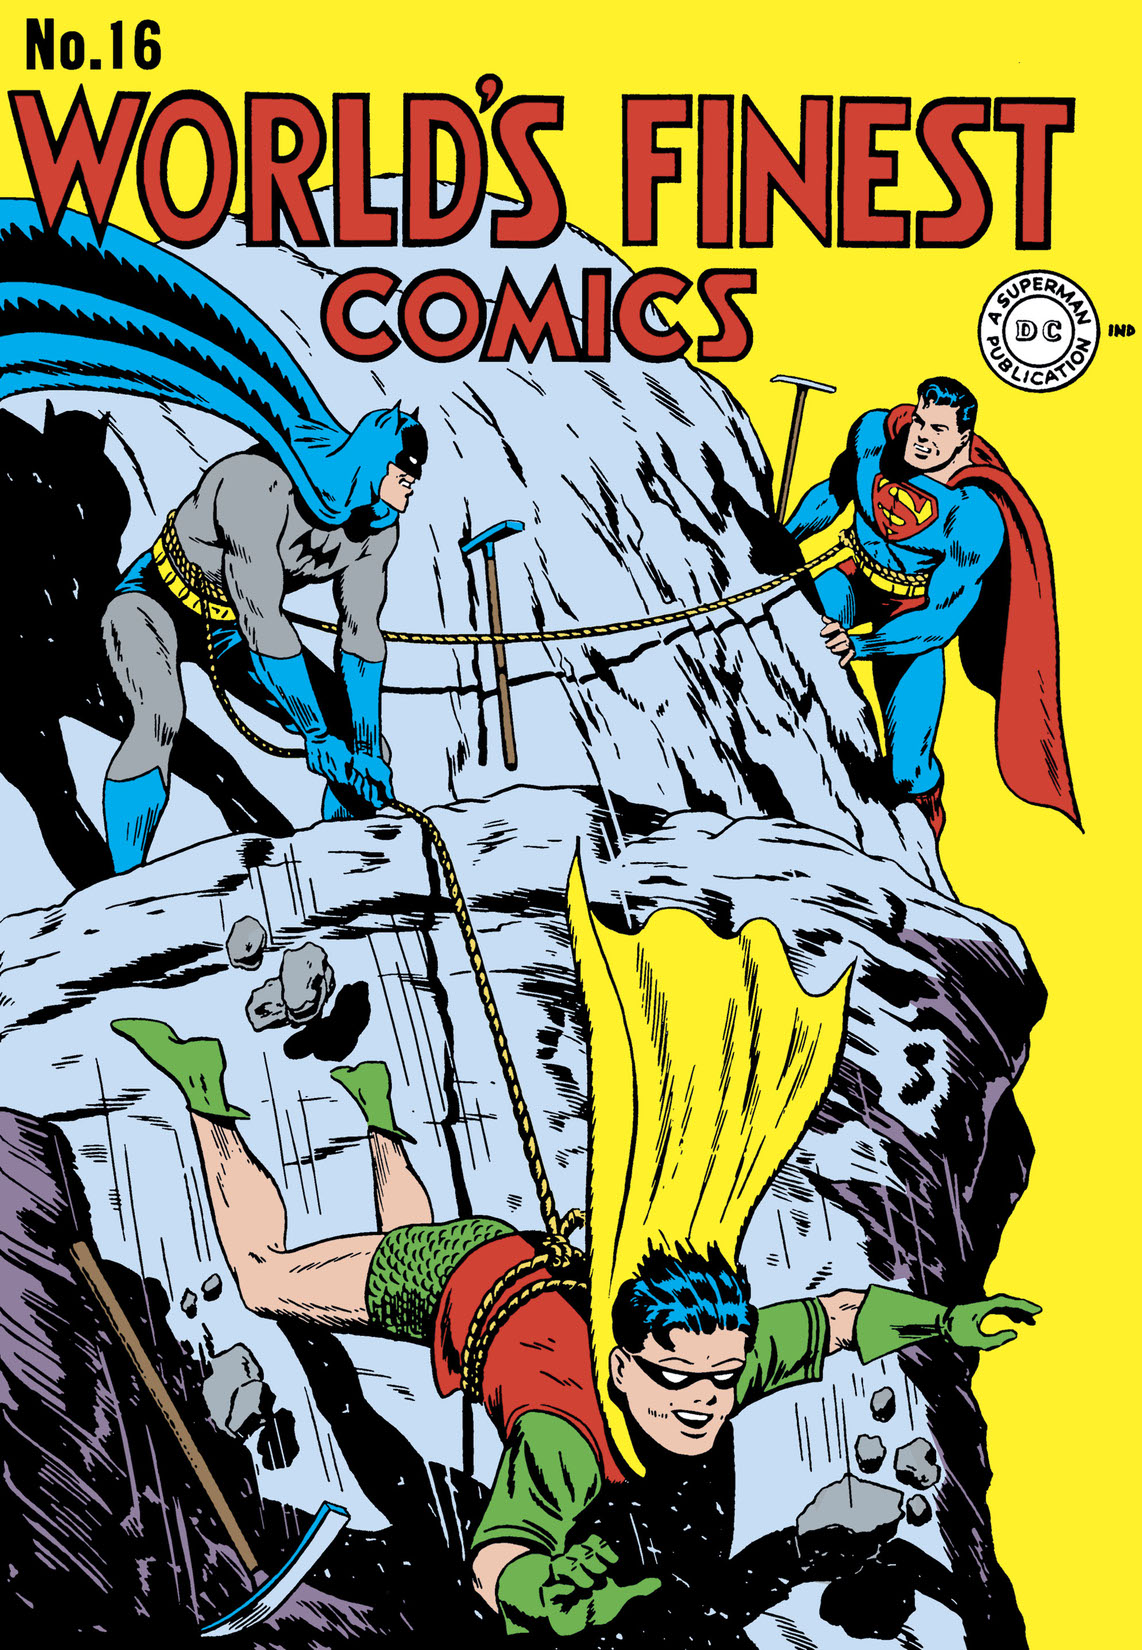 World's Finest Comics (1941-) #16 preview images